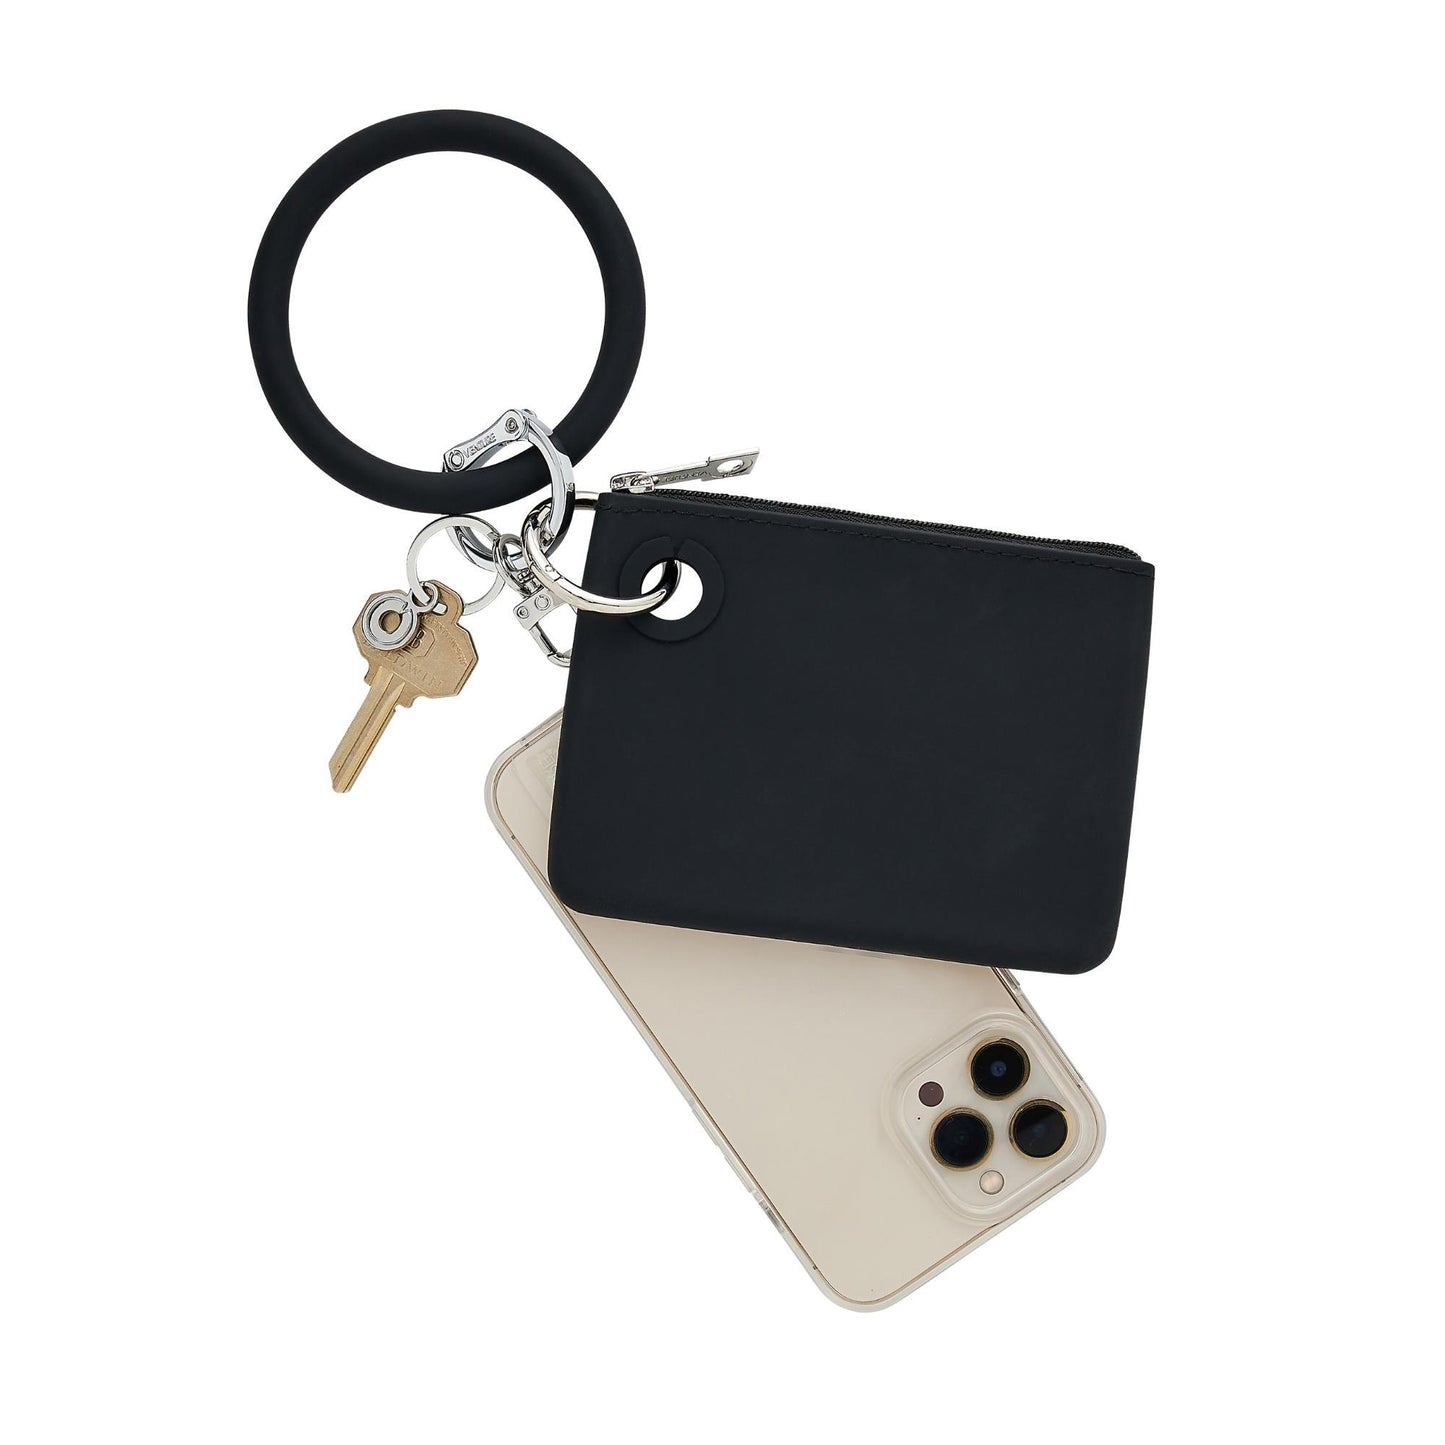 Pouch Wristlet mini in smooth silicone material.